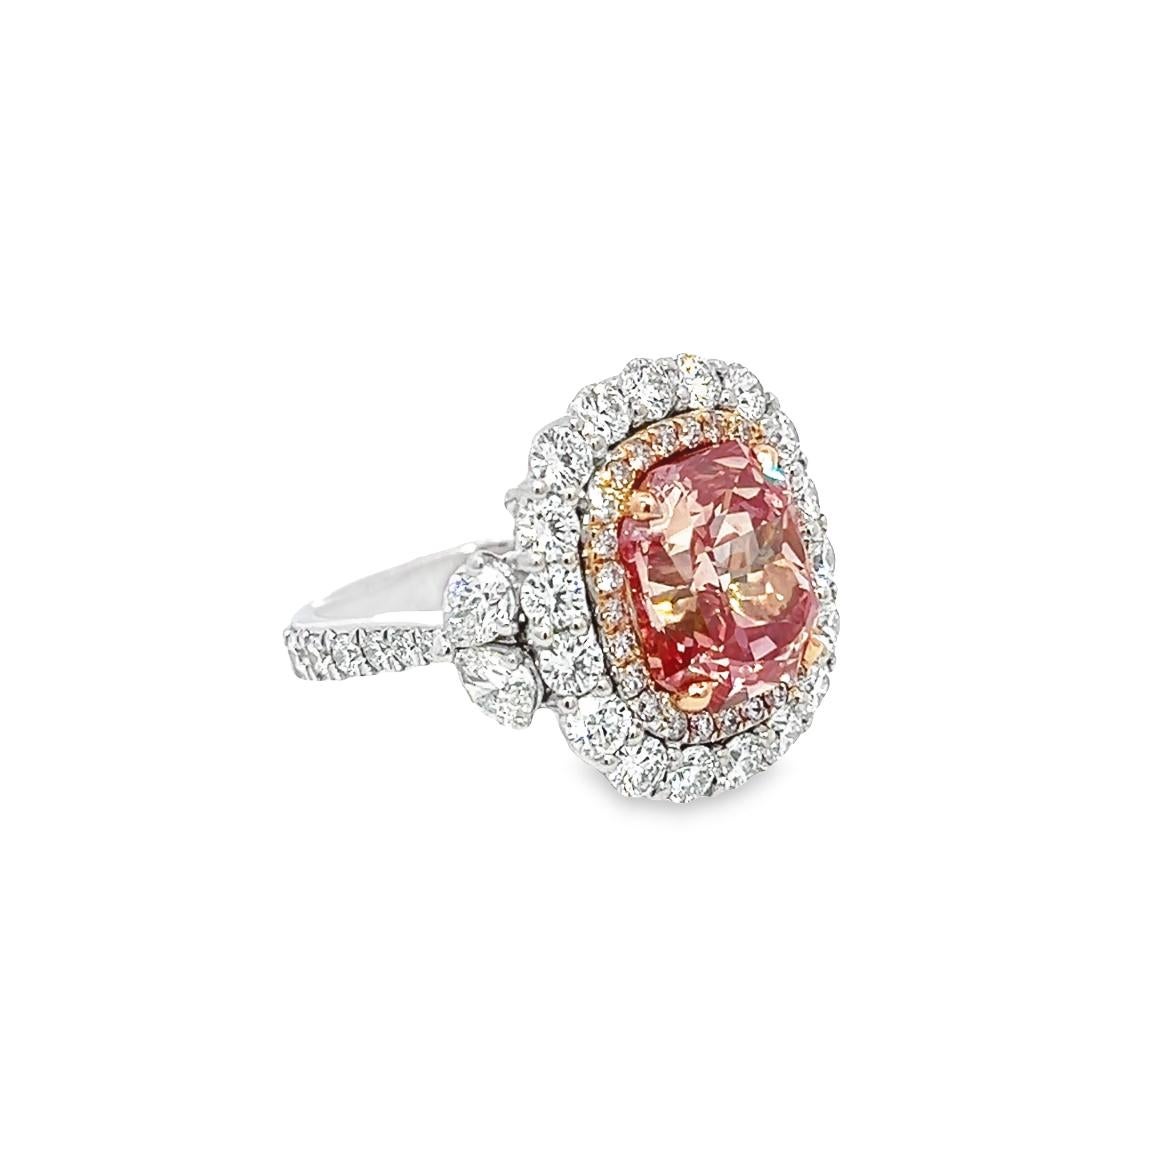 Cushion Cut 11.31CT Total Weight Fancy Vivid Pink Diamond Ring, GIA Certified For Sale